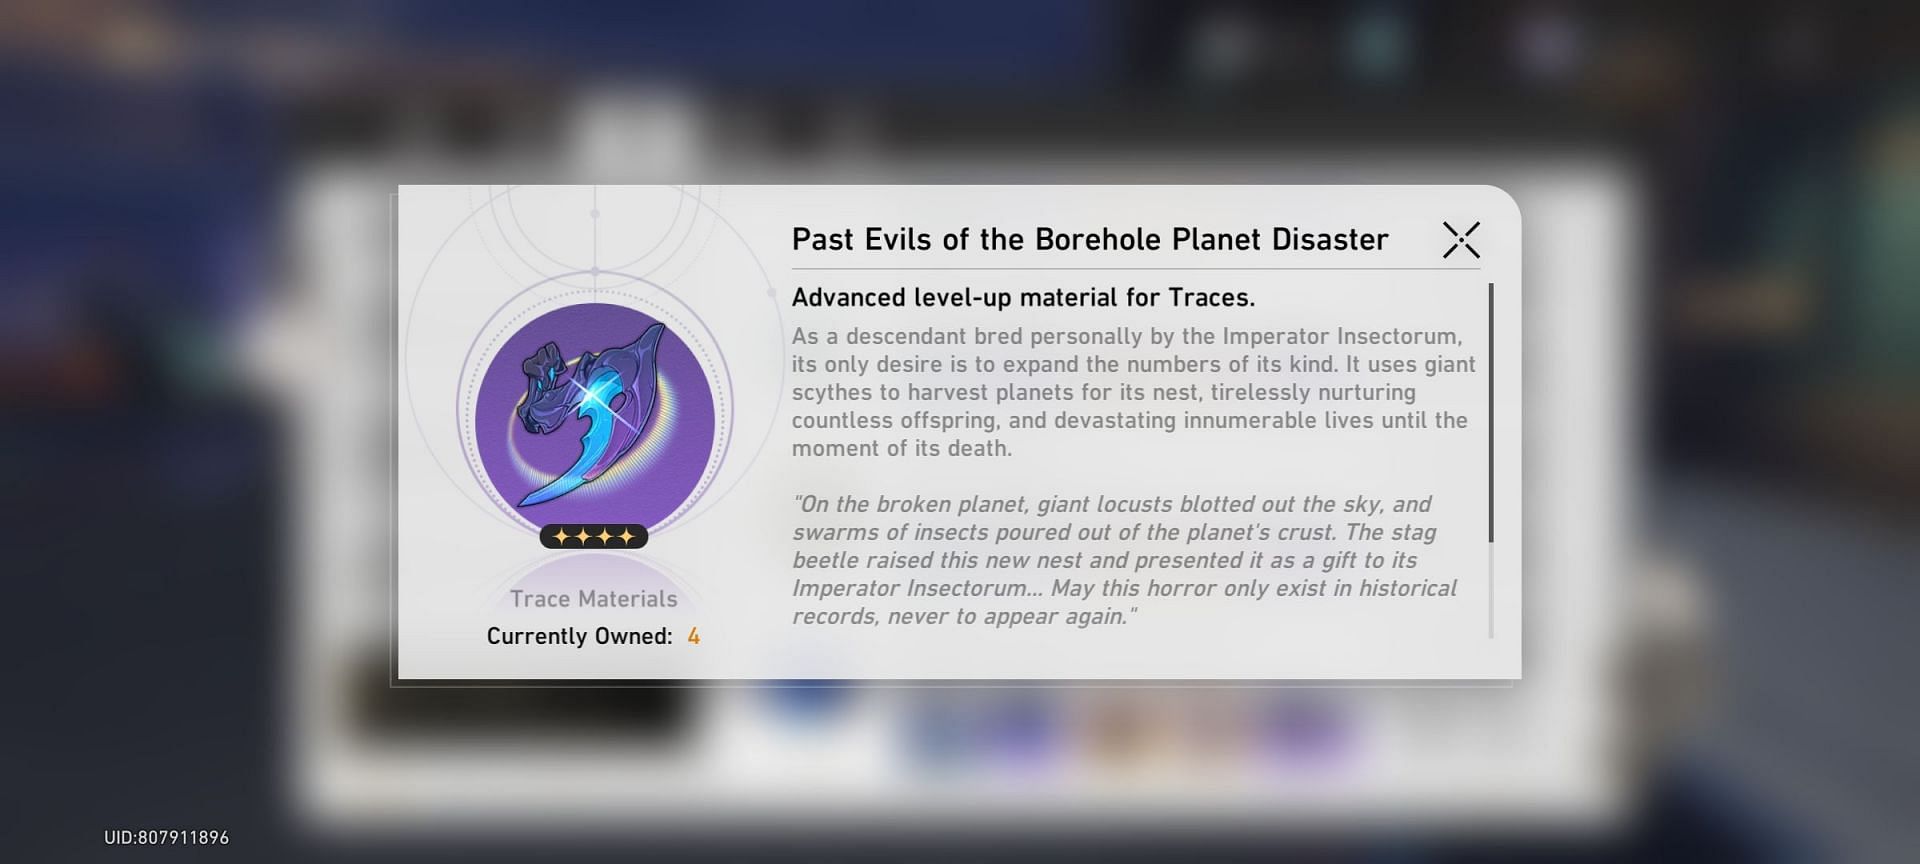 Past Evils of the Borehole Planet Disaster, an advance trace material in Star Rail (Image via HoYoverse)